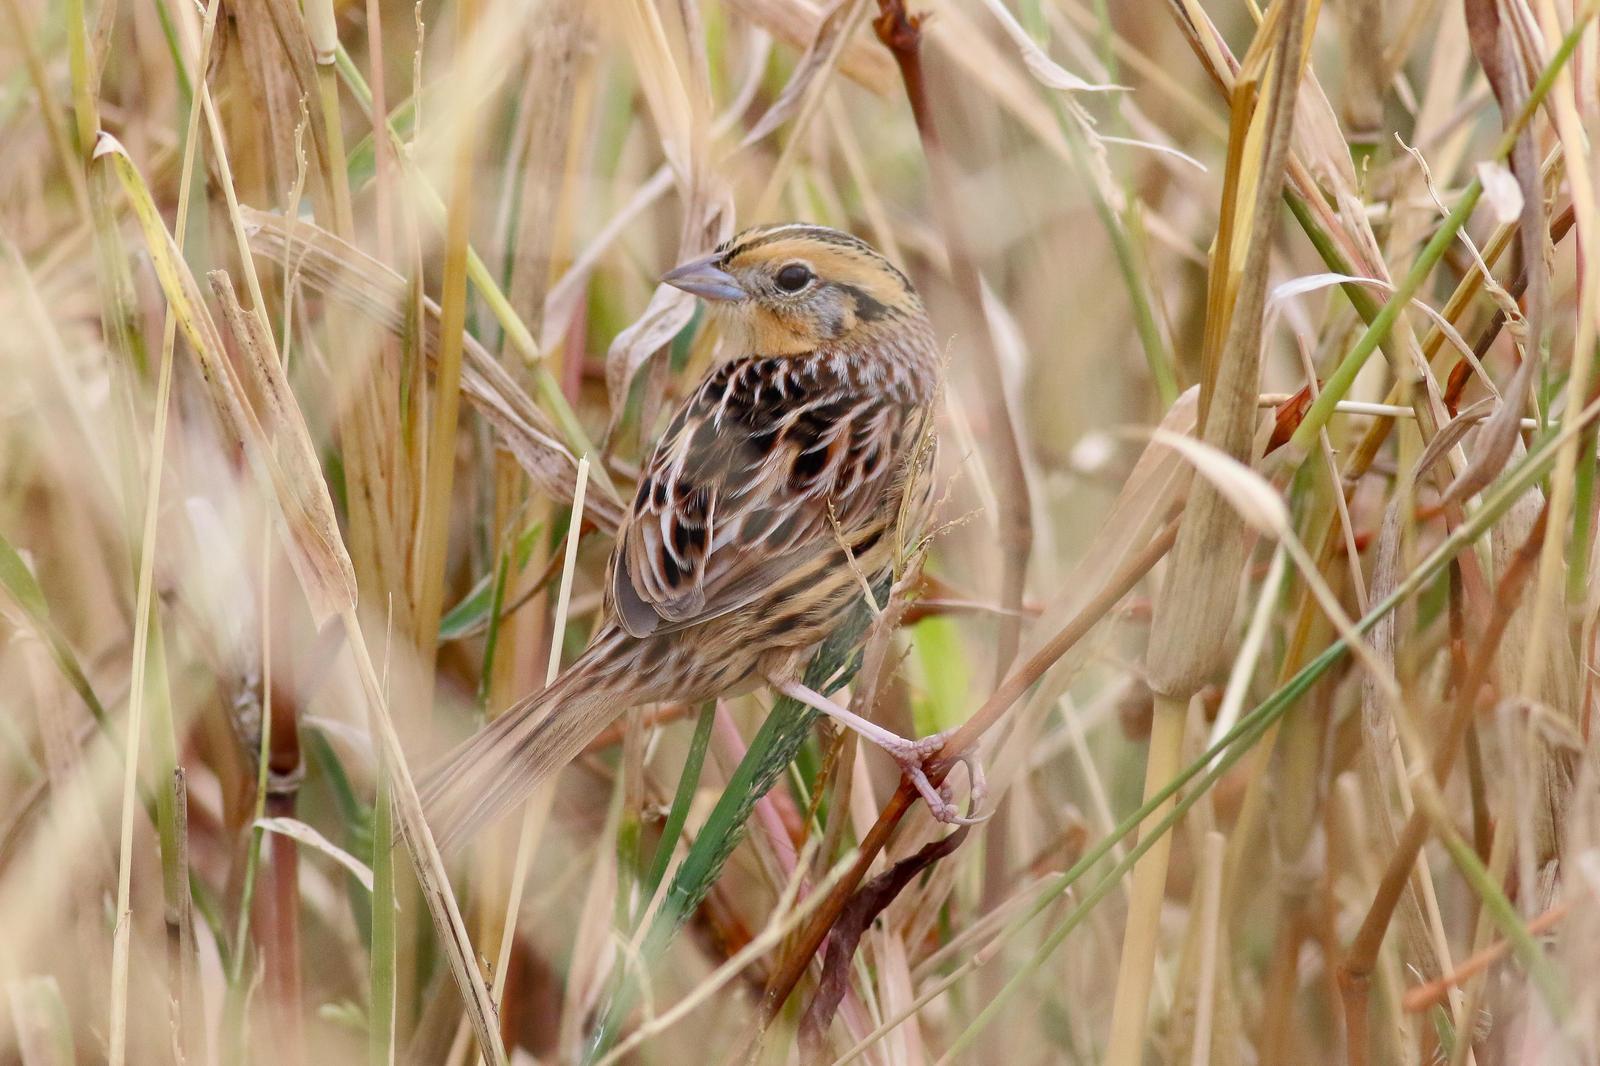 LeConte's Sparrow Photo by Tom Ford-Hutchinson